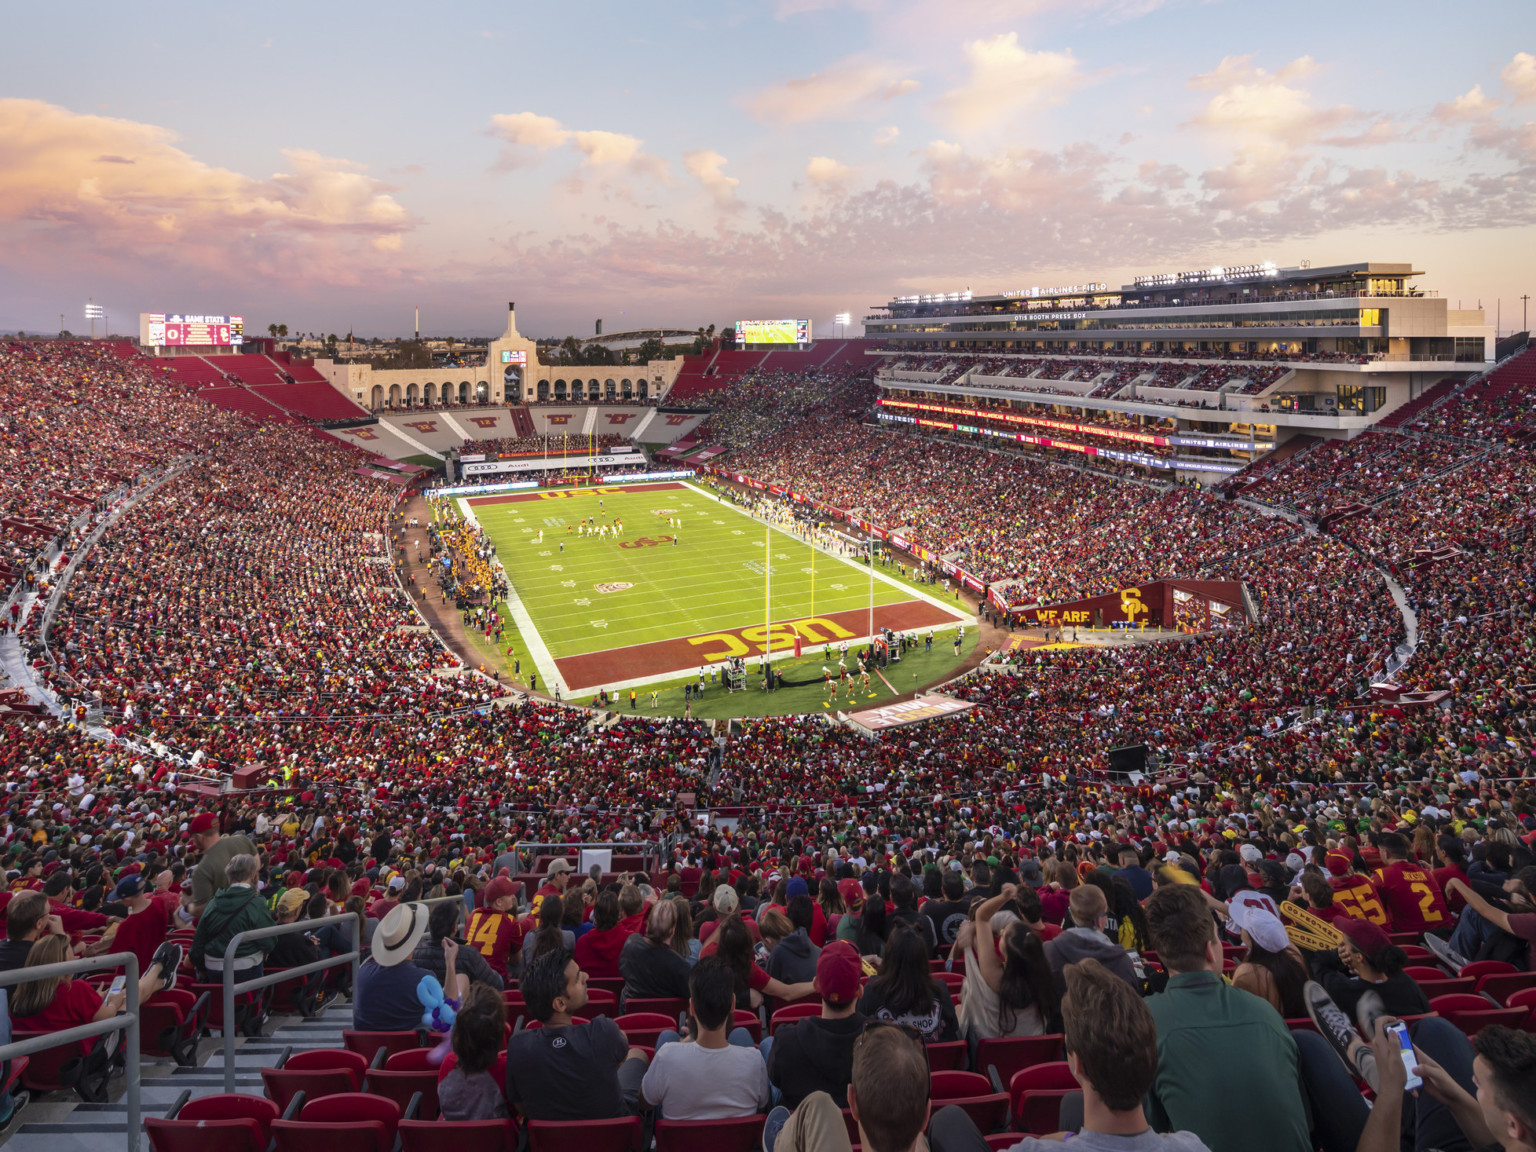 University of Southern California Los Angeles Memorial Coliseum with full bleachers on game day